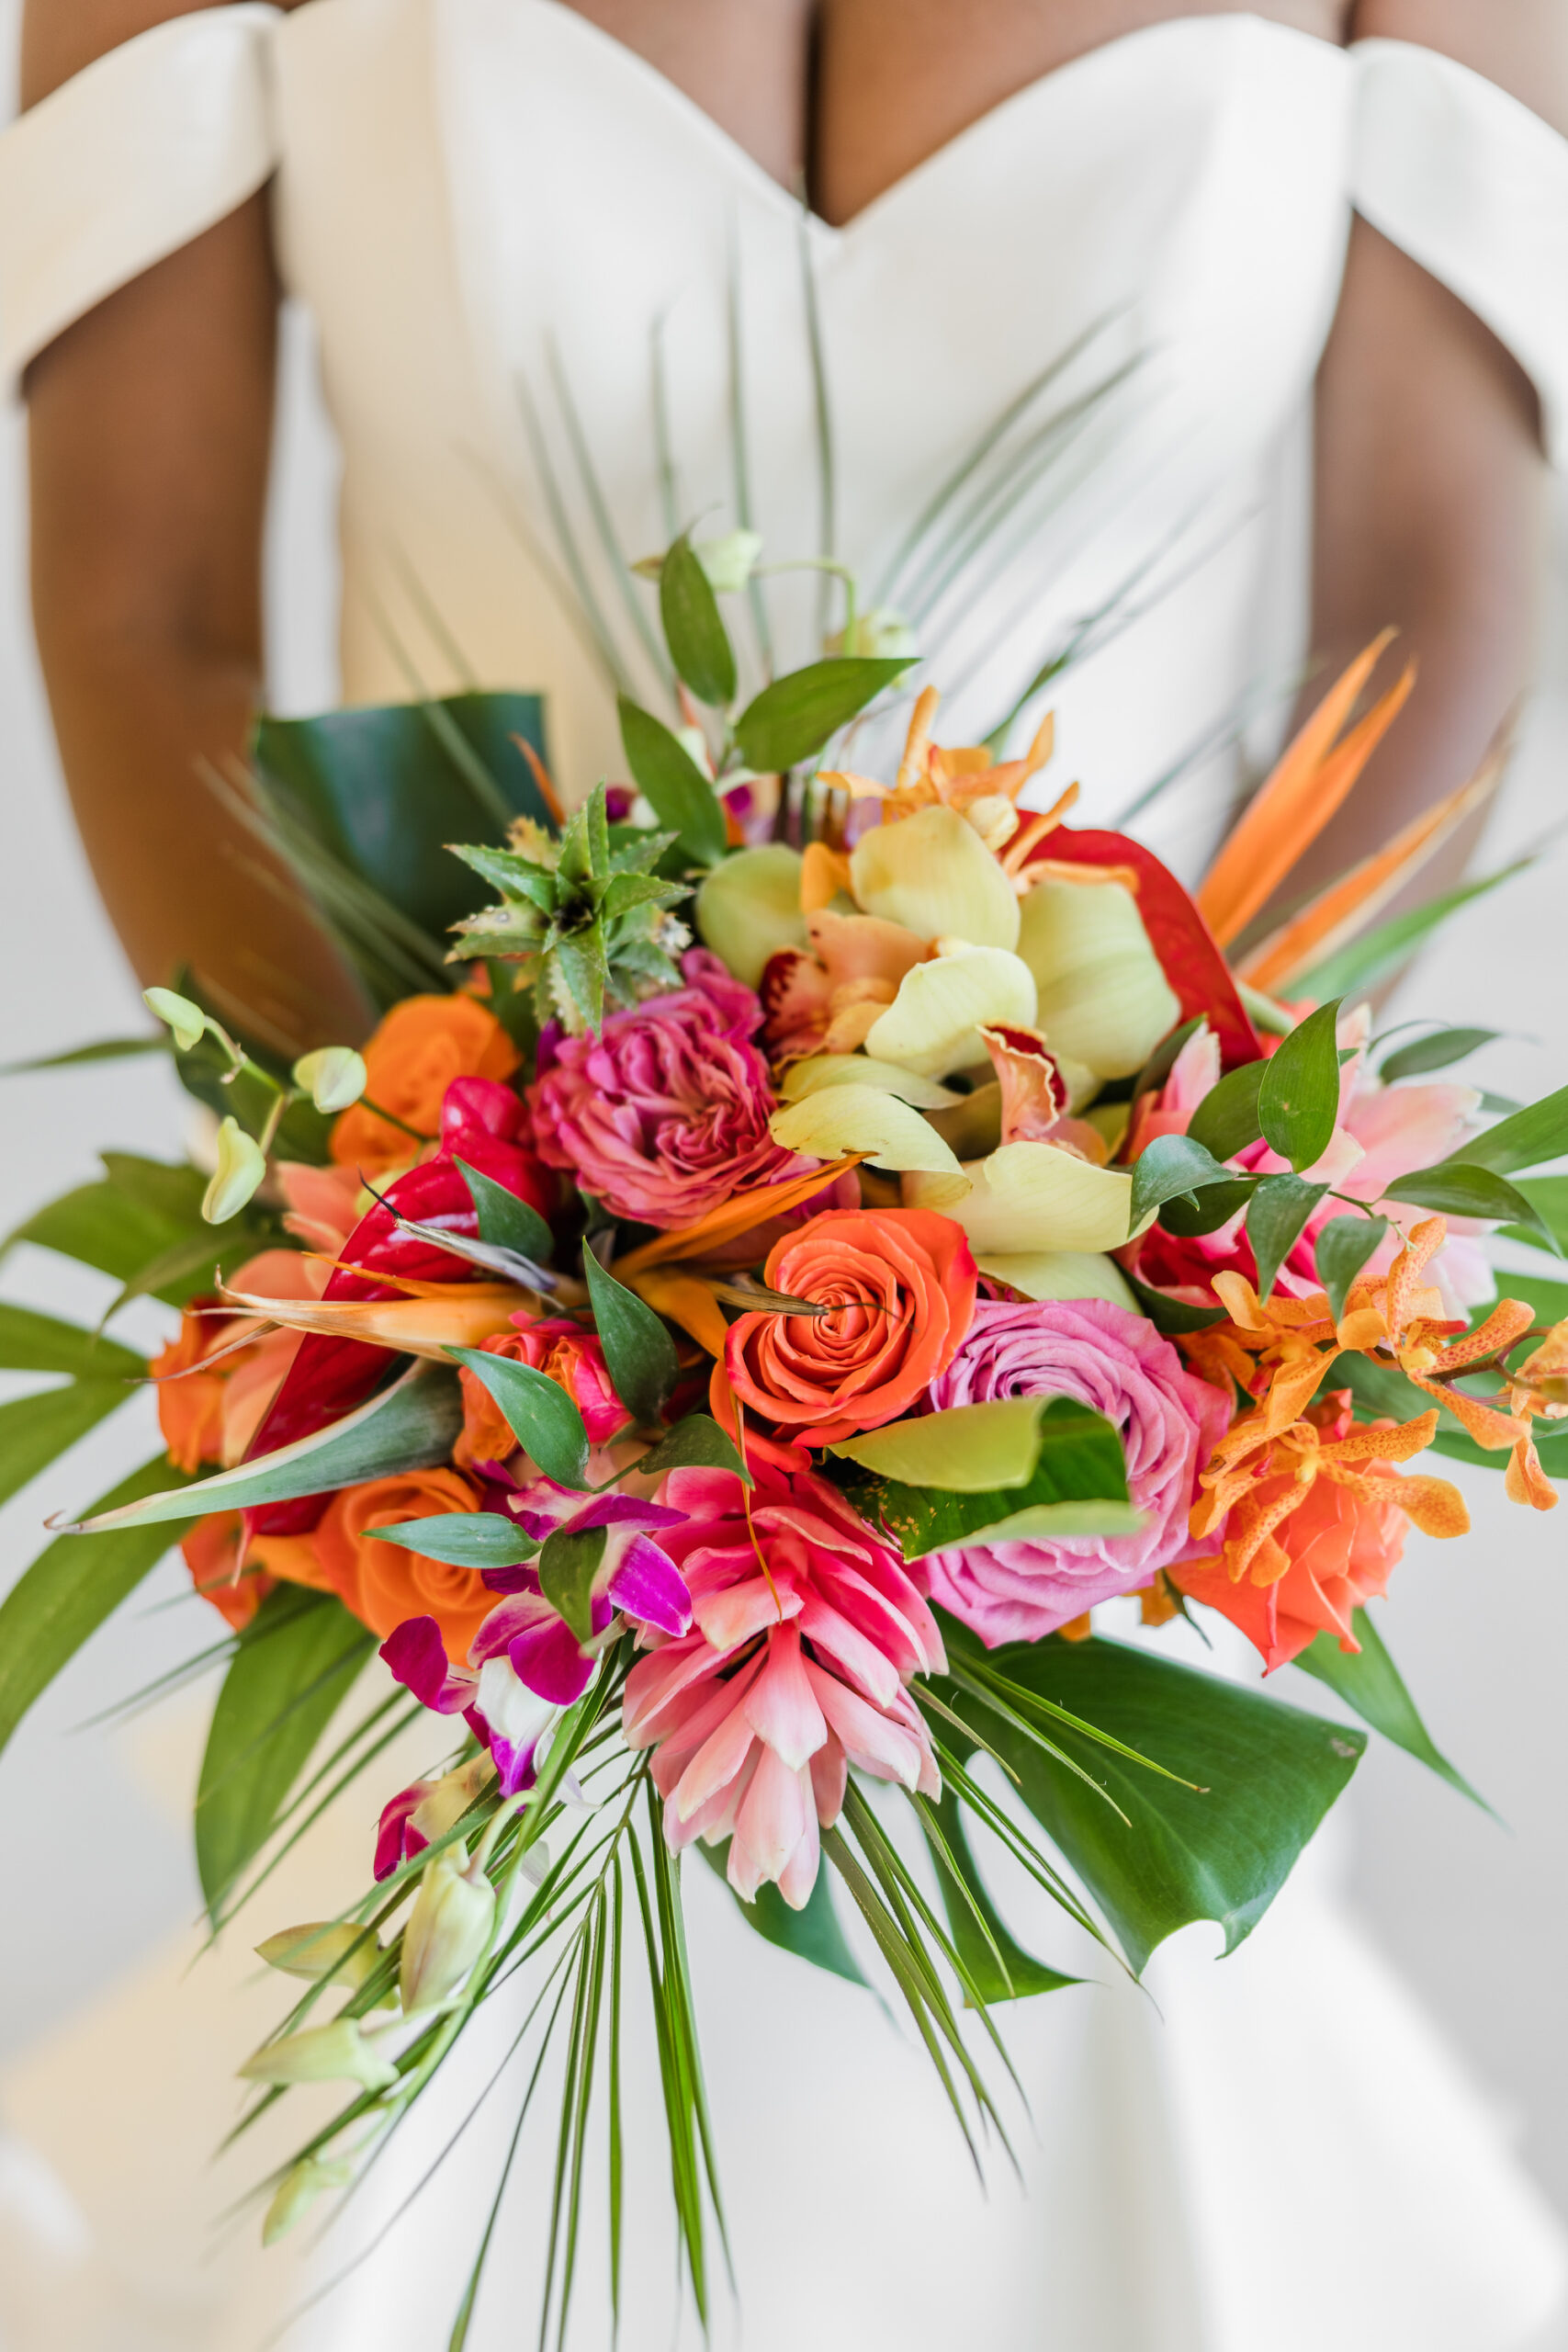 Lush Orange, Purple, Pink, and Yellow Flowers with Tropical Greenery Bridal Wedding Bouquet Inspiration | Tampa Bay Florist Save the Date Florida